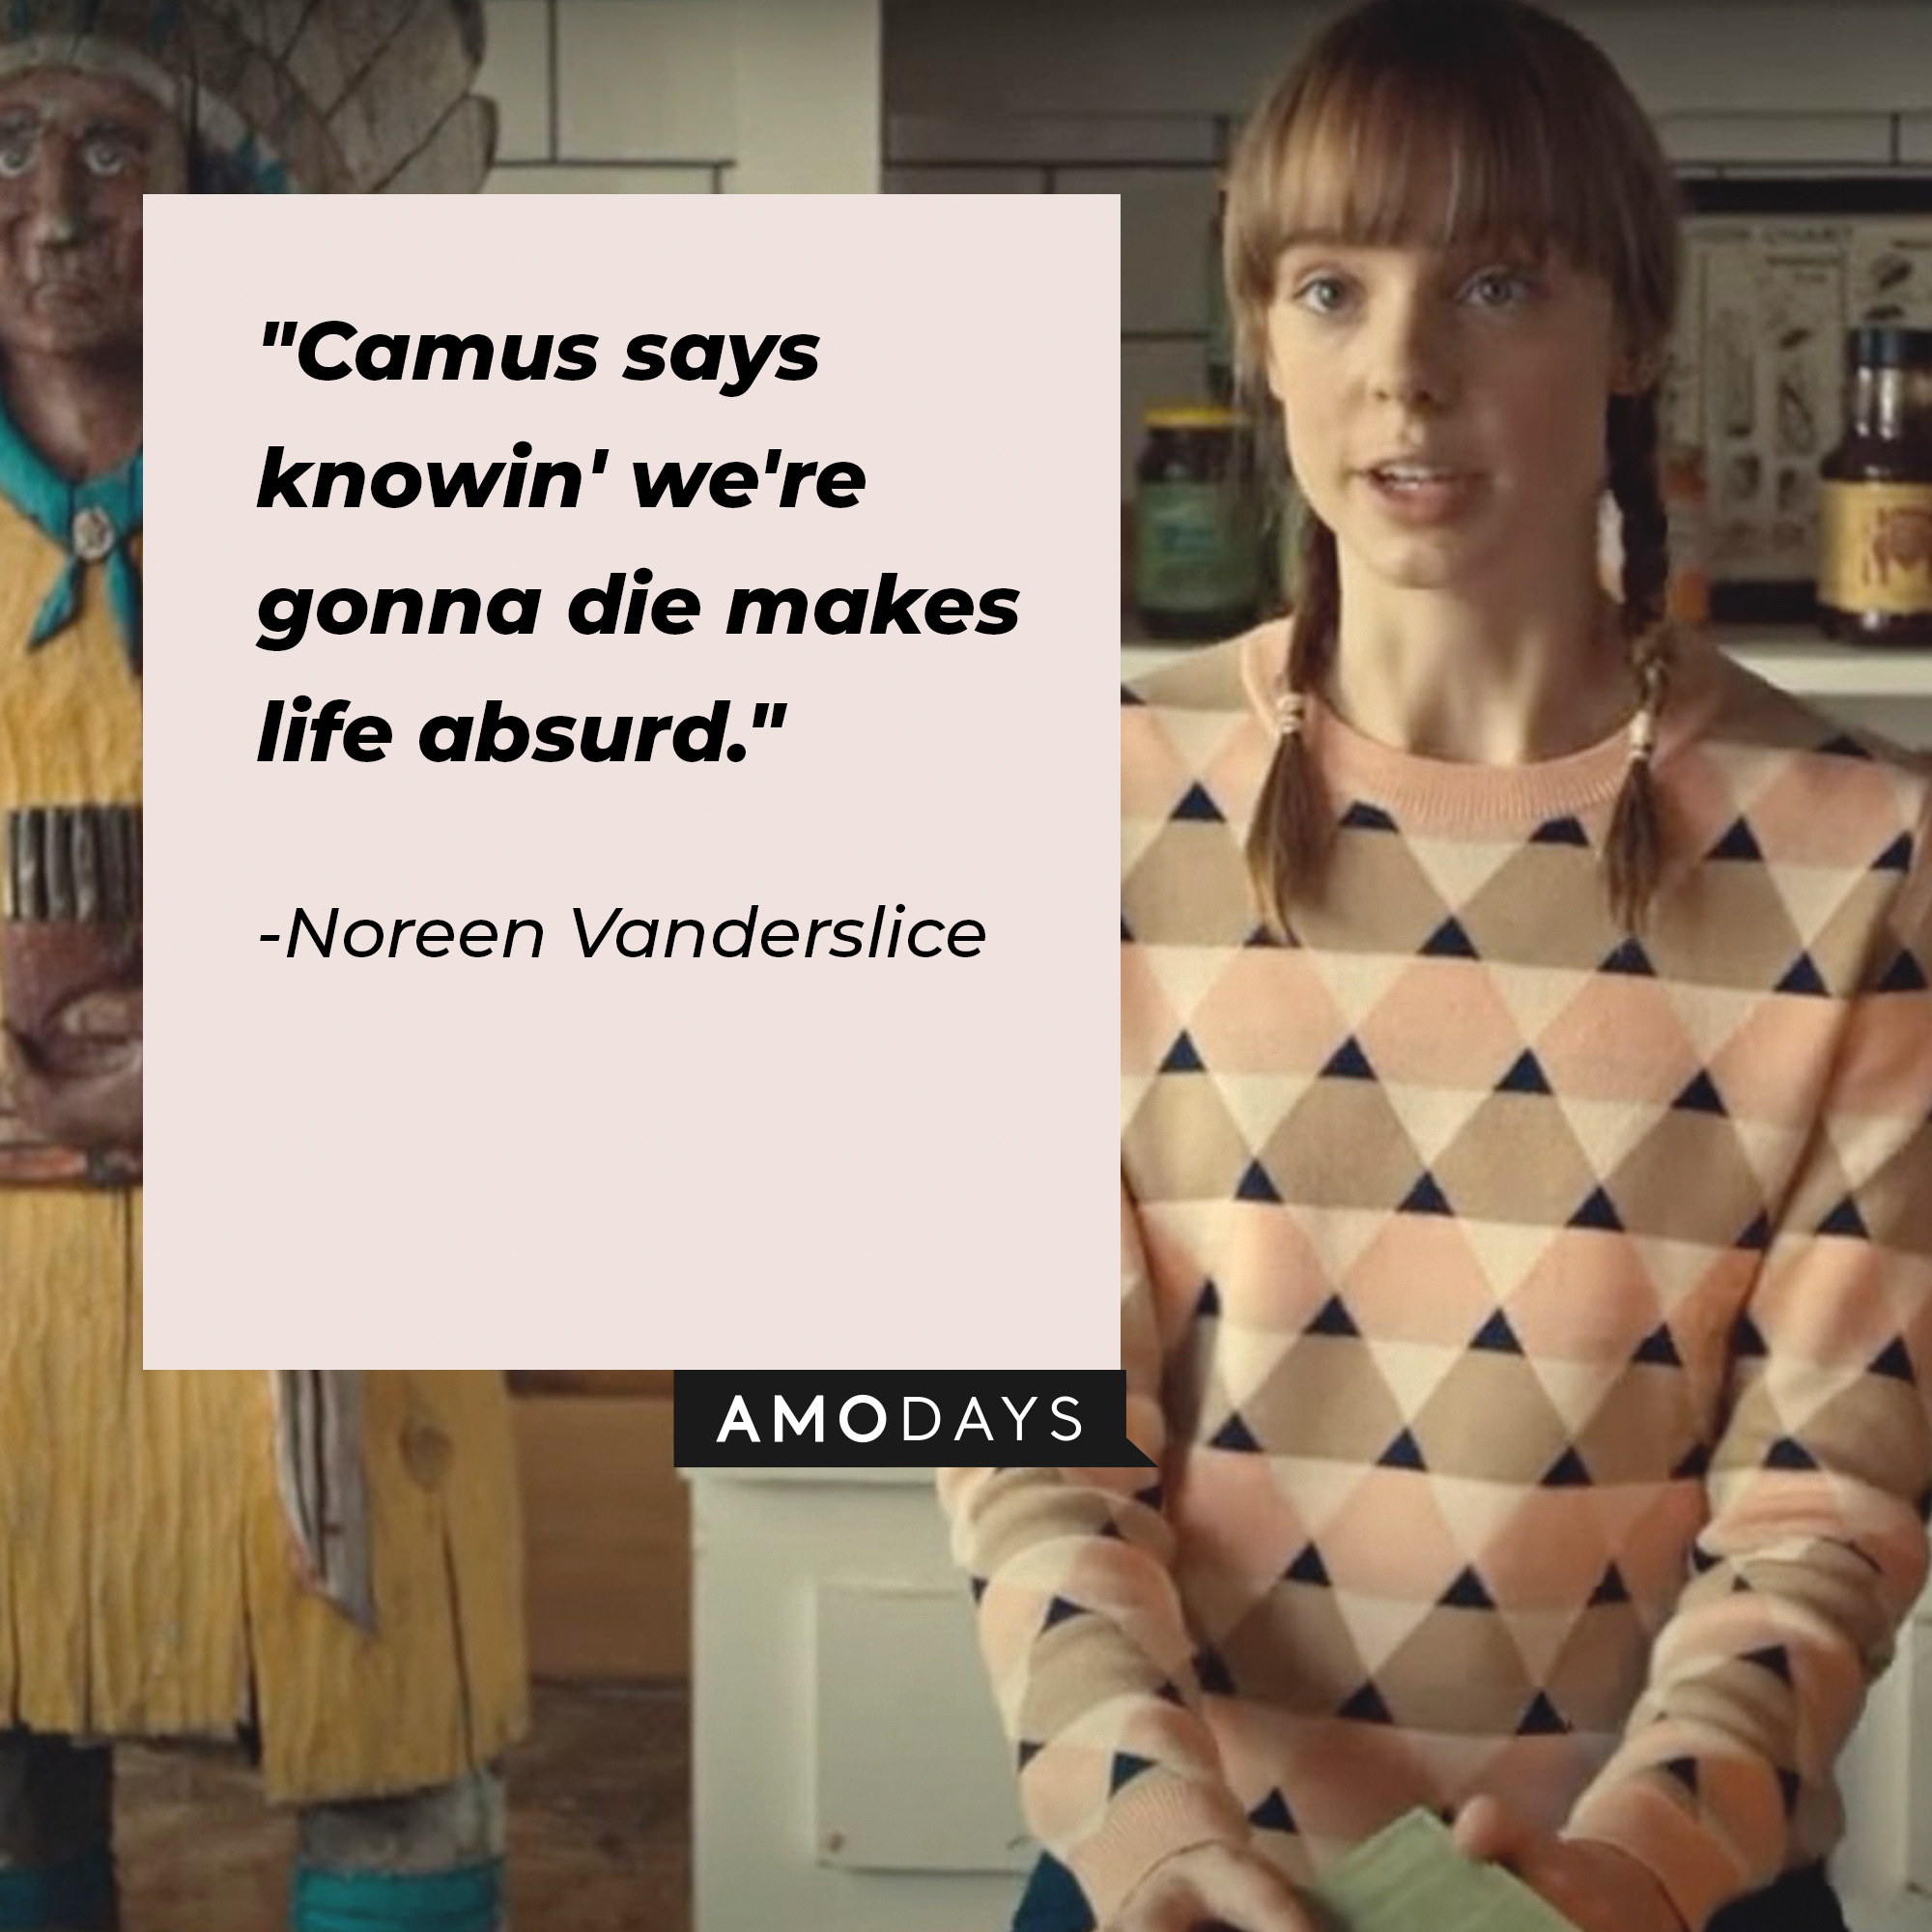 Noreen Vanderslice, with her quote: “Camus says knowin' we're gonna die makes life absurd.” | Source:youtube.com/Netflix